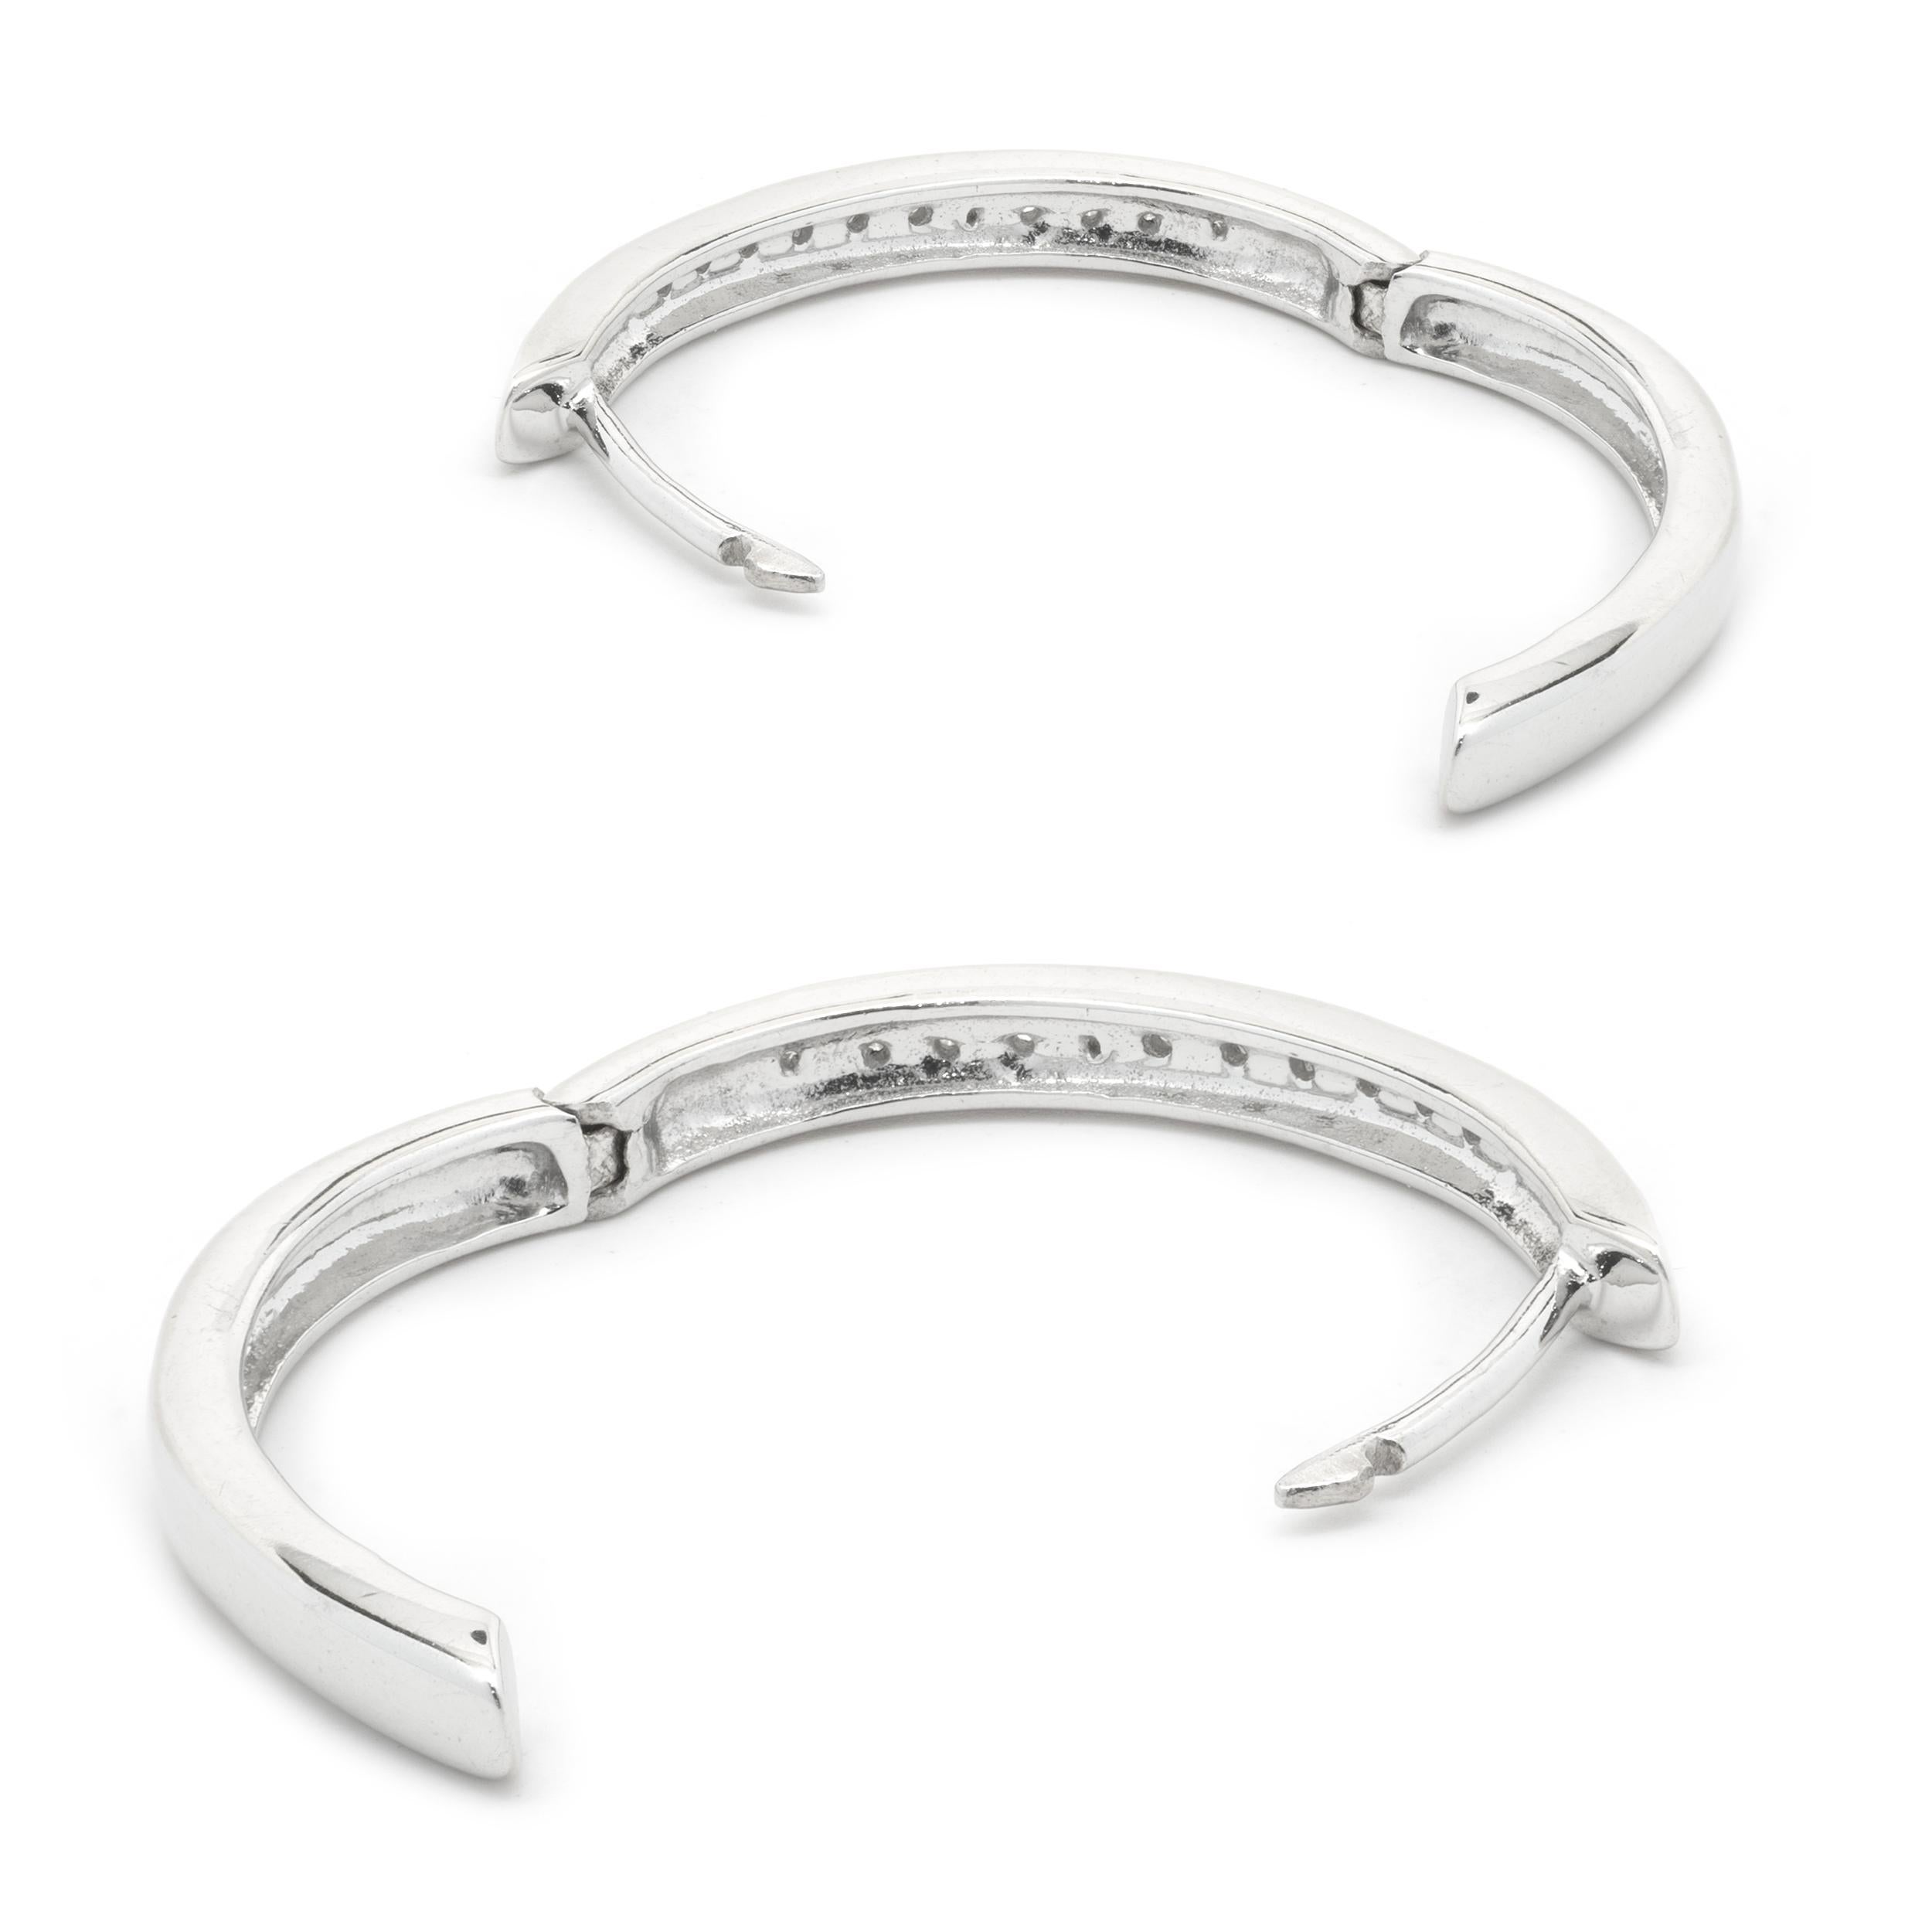 10 Karat White Gold Diamond Oval Hoop Earrings In Excellent Condition For Sale In Scottsdale, AZ